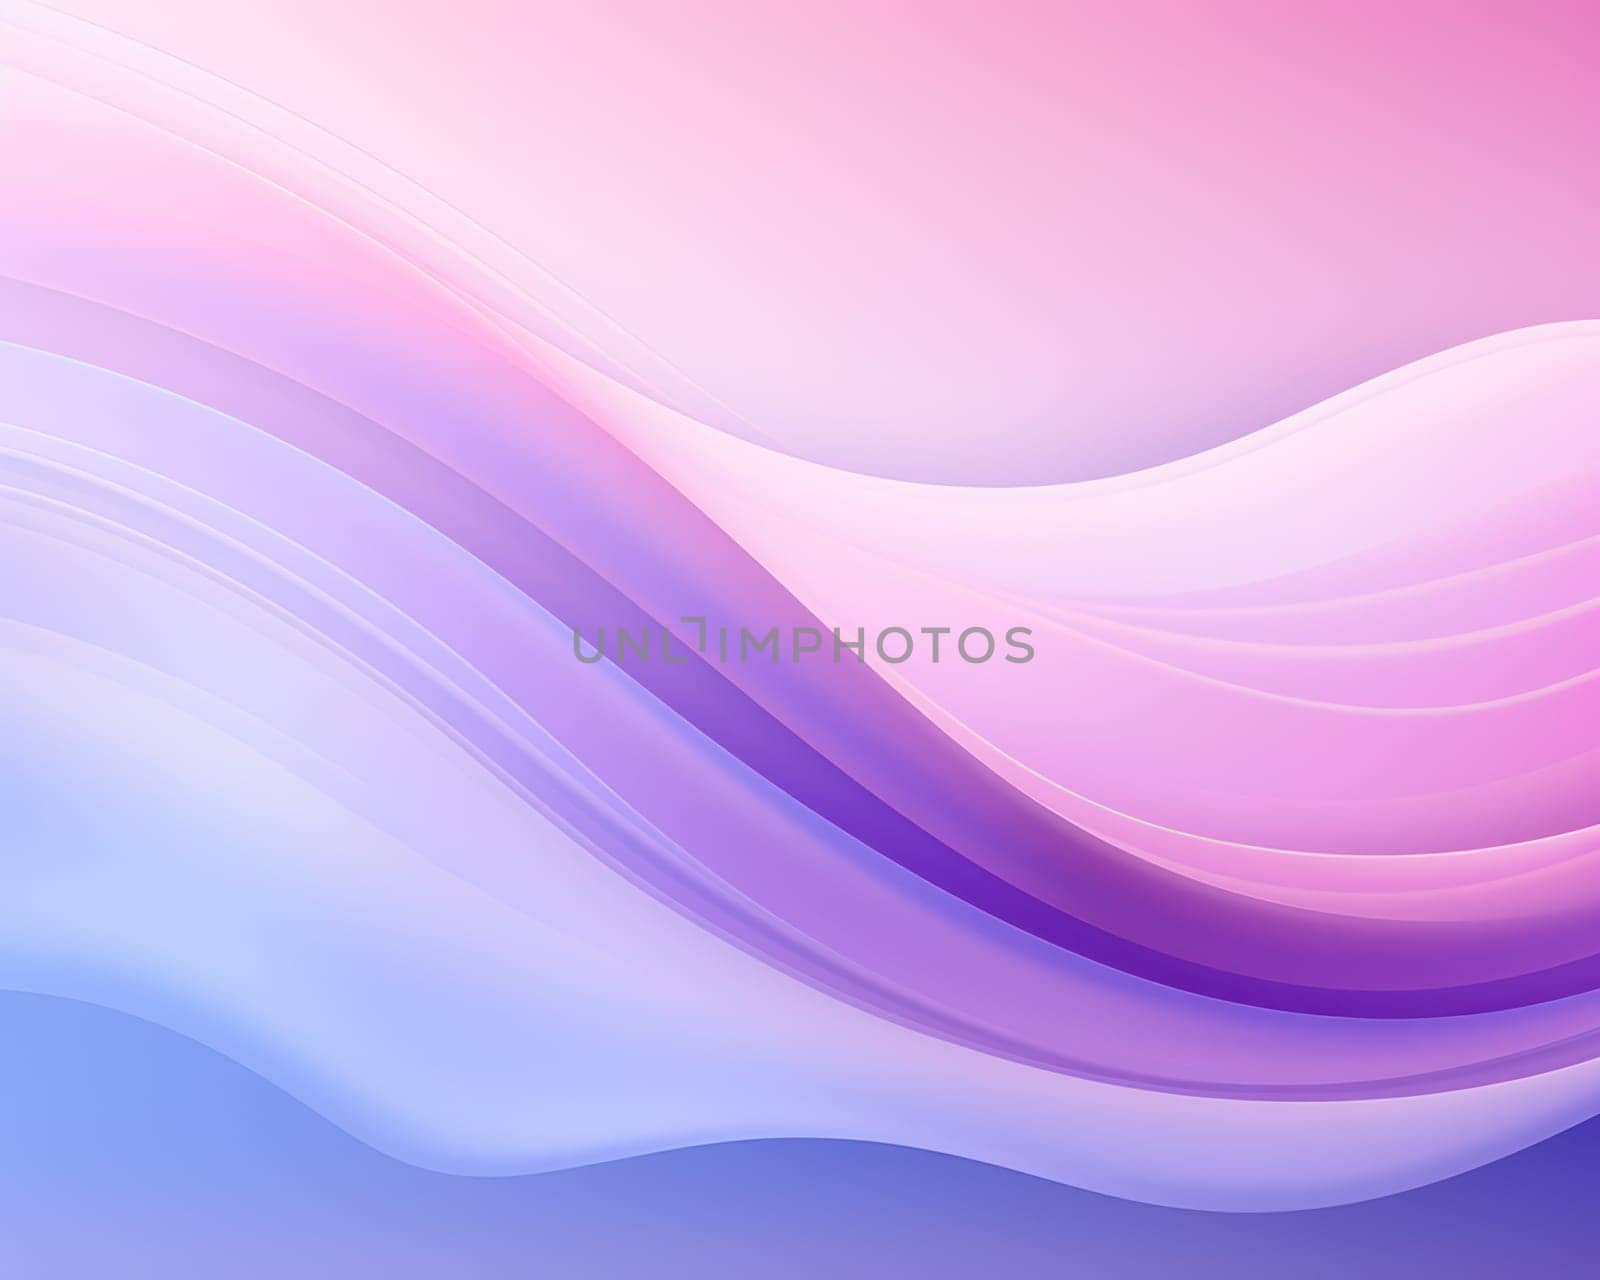 Fluid Waves in Futuristic Gradient: Abstract, Modern, and Dynamic Illustration on a Vibrant Blue Background by Vichizh